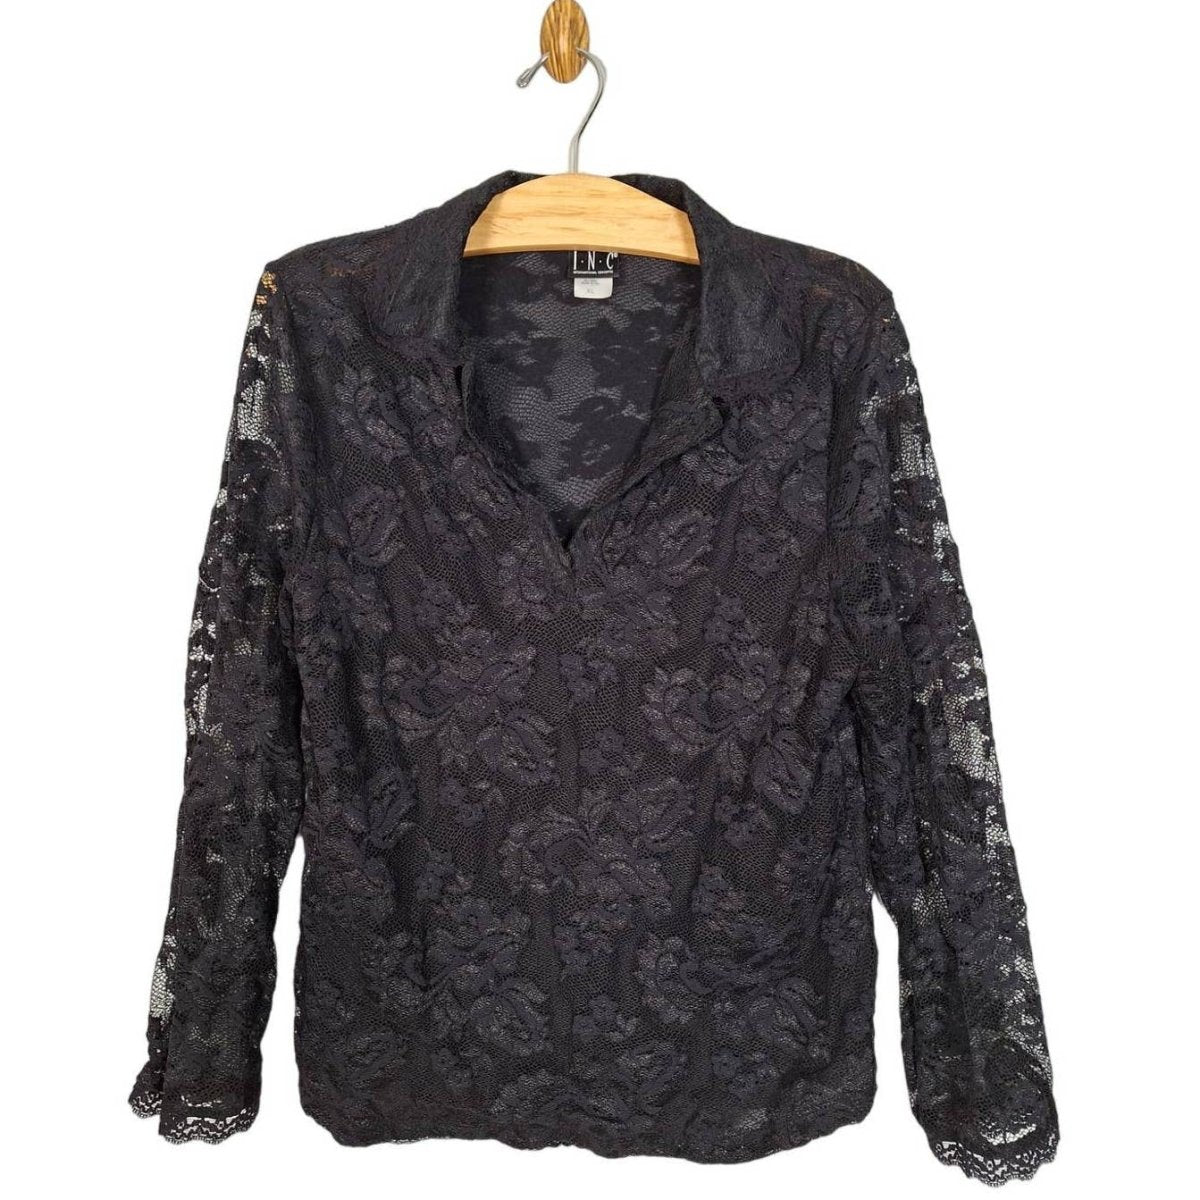 Vintage 90s Black Lace Stretch Blouse Size XL Chest 40" to 48" - themallvintage The Mall Vintage